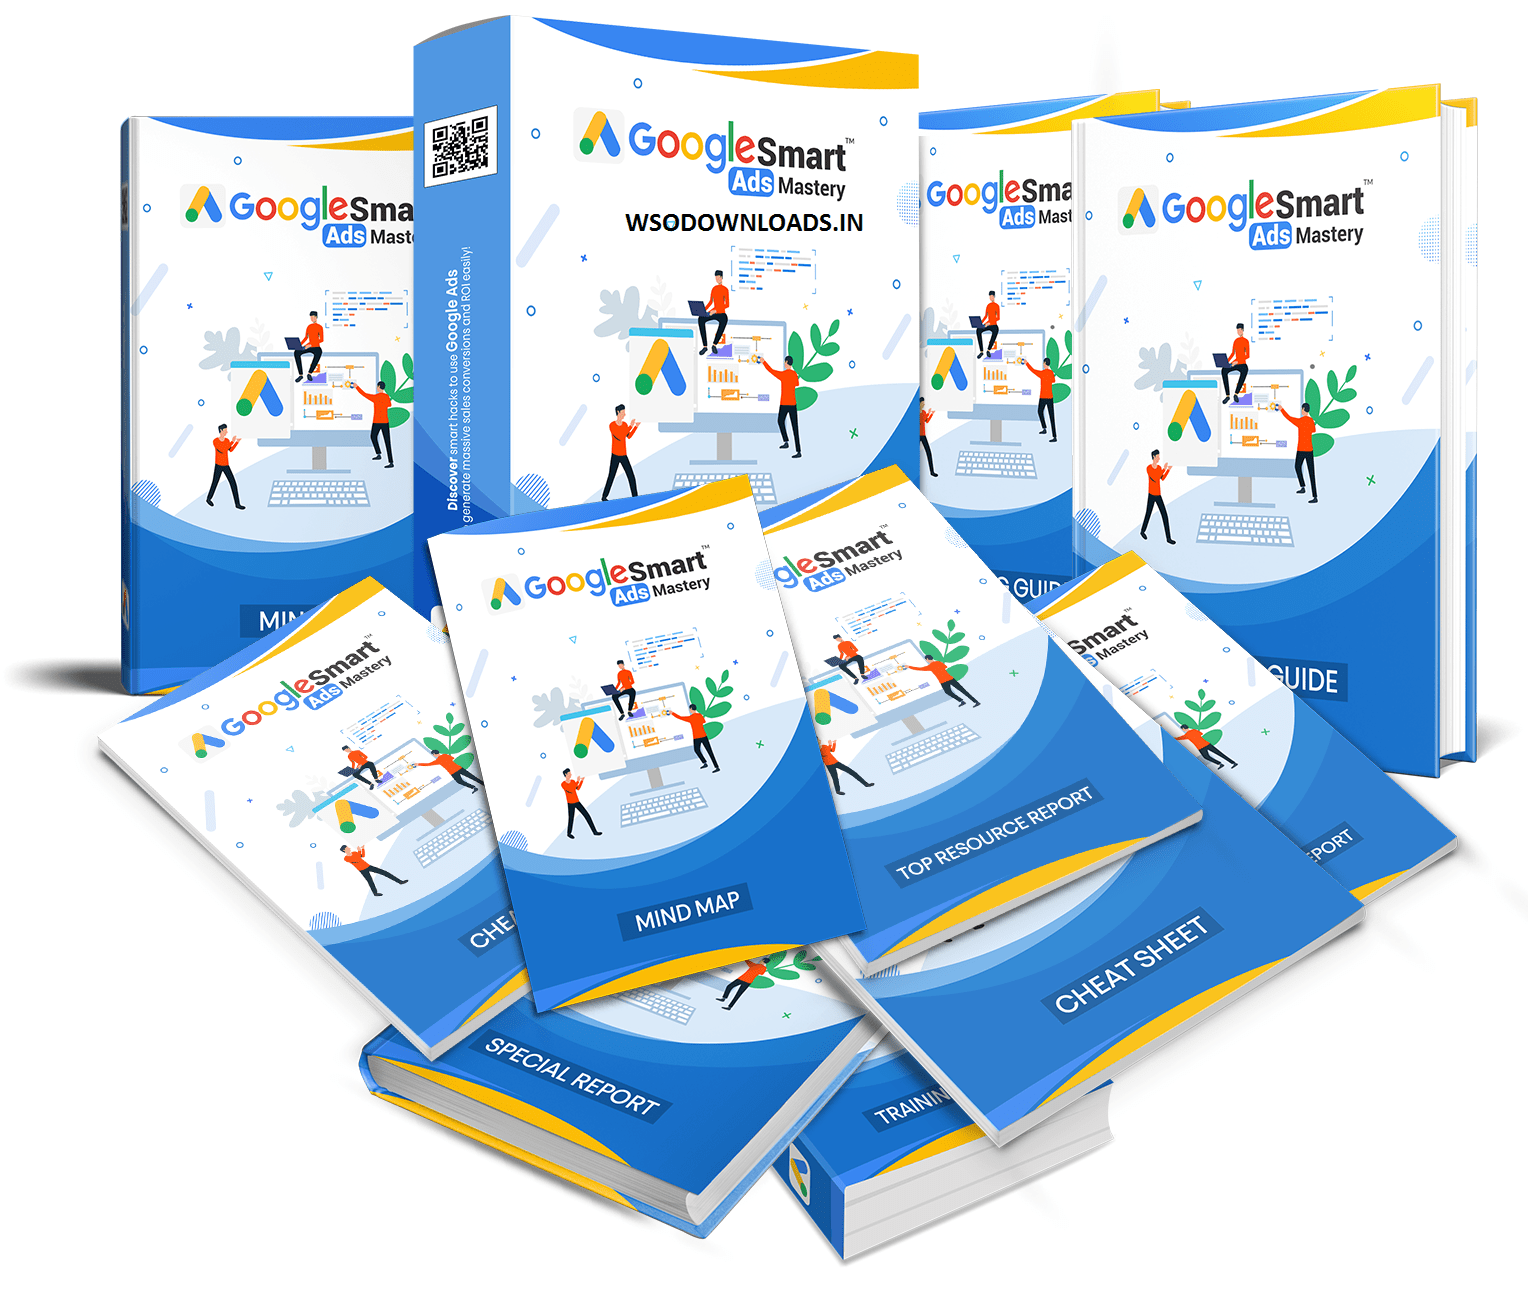 [GET] Google Smart Ads Mastery Course with PLR + Bonuses Download